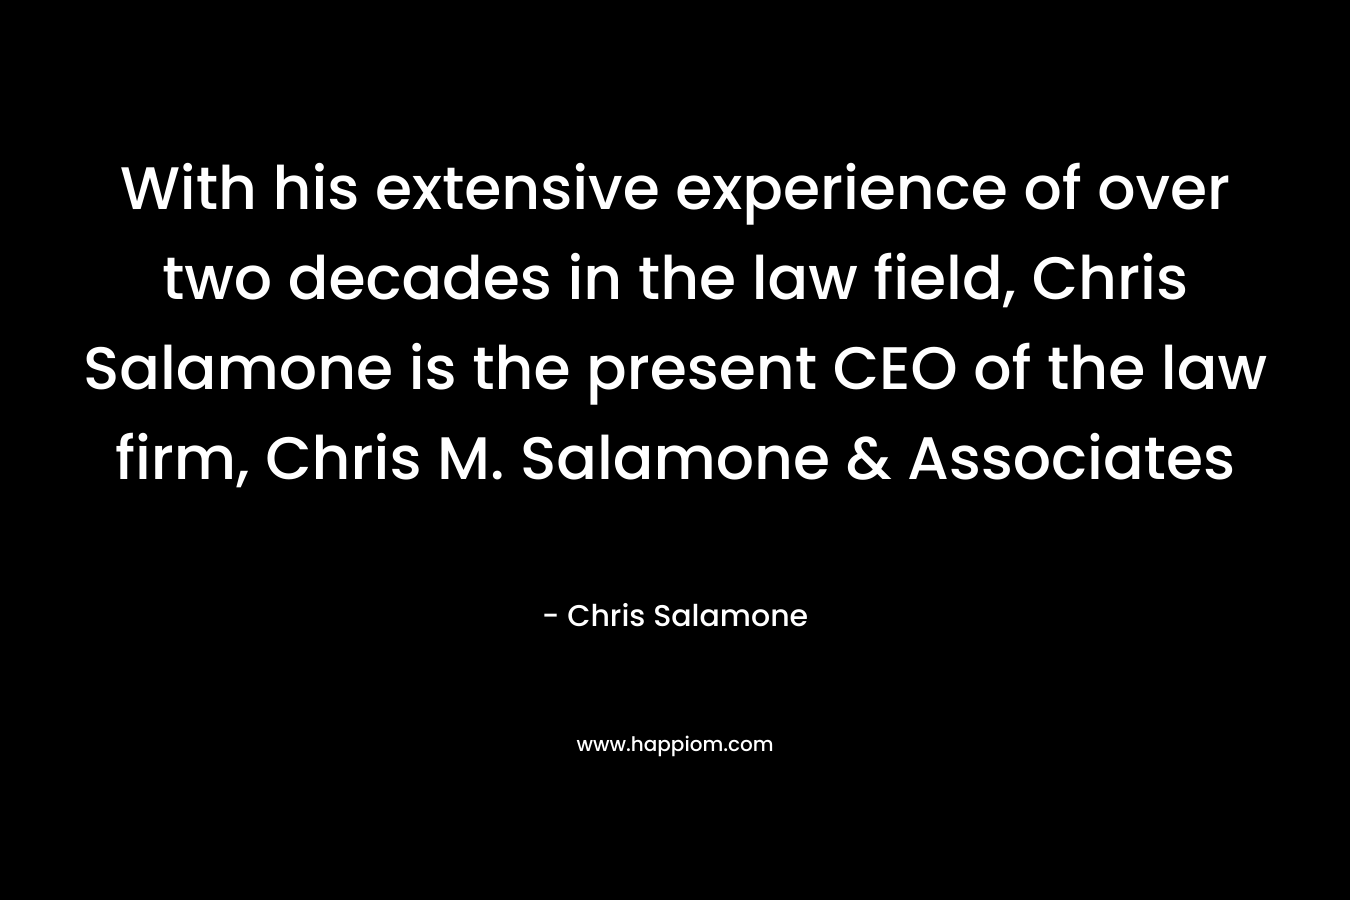 With his extensive experience of over two decades in the law field, Chris Salamone is the present CEO of the law firm, Chris M. Salamone & Associates – Chris Salamone